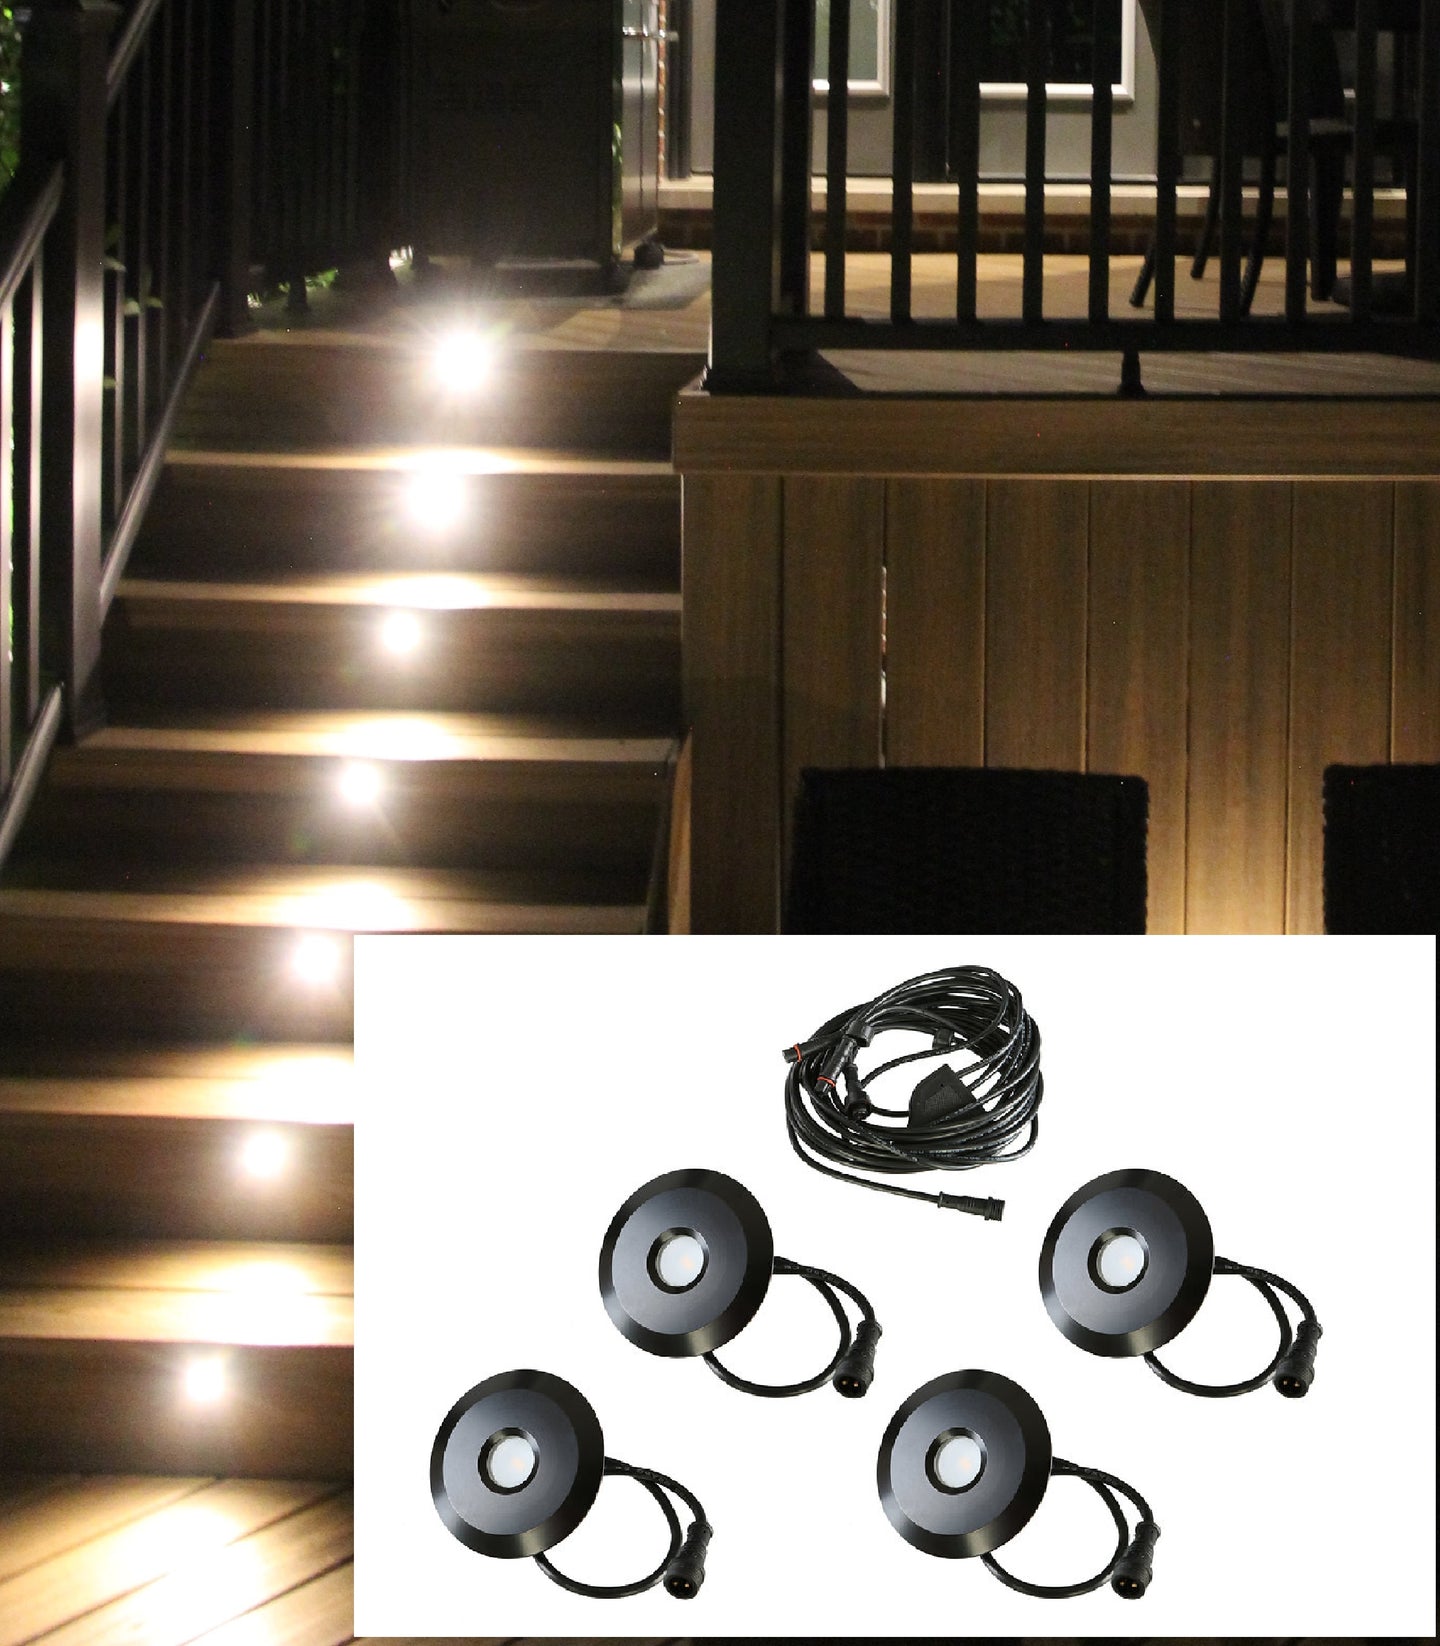 BIG Round Metal Trim - LED Outdoor Recessed Lights KIT - 4 Mini Deck/Patio Lights 0.5W (Spring Fit) with Wire Harness Splitter - #EZKITBRT4